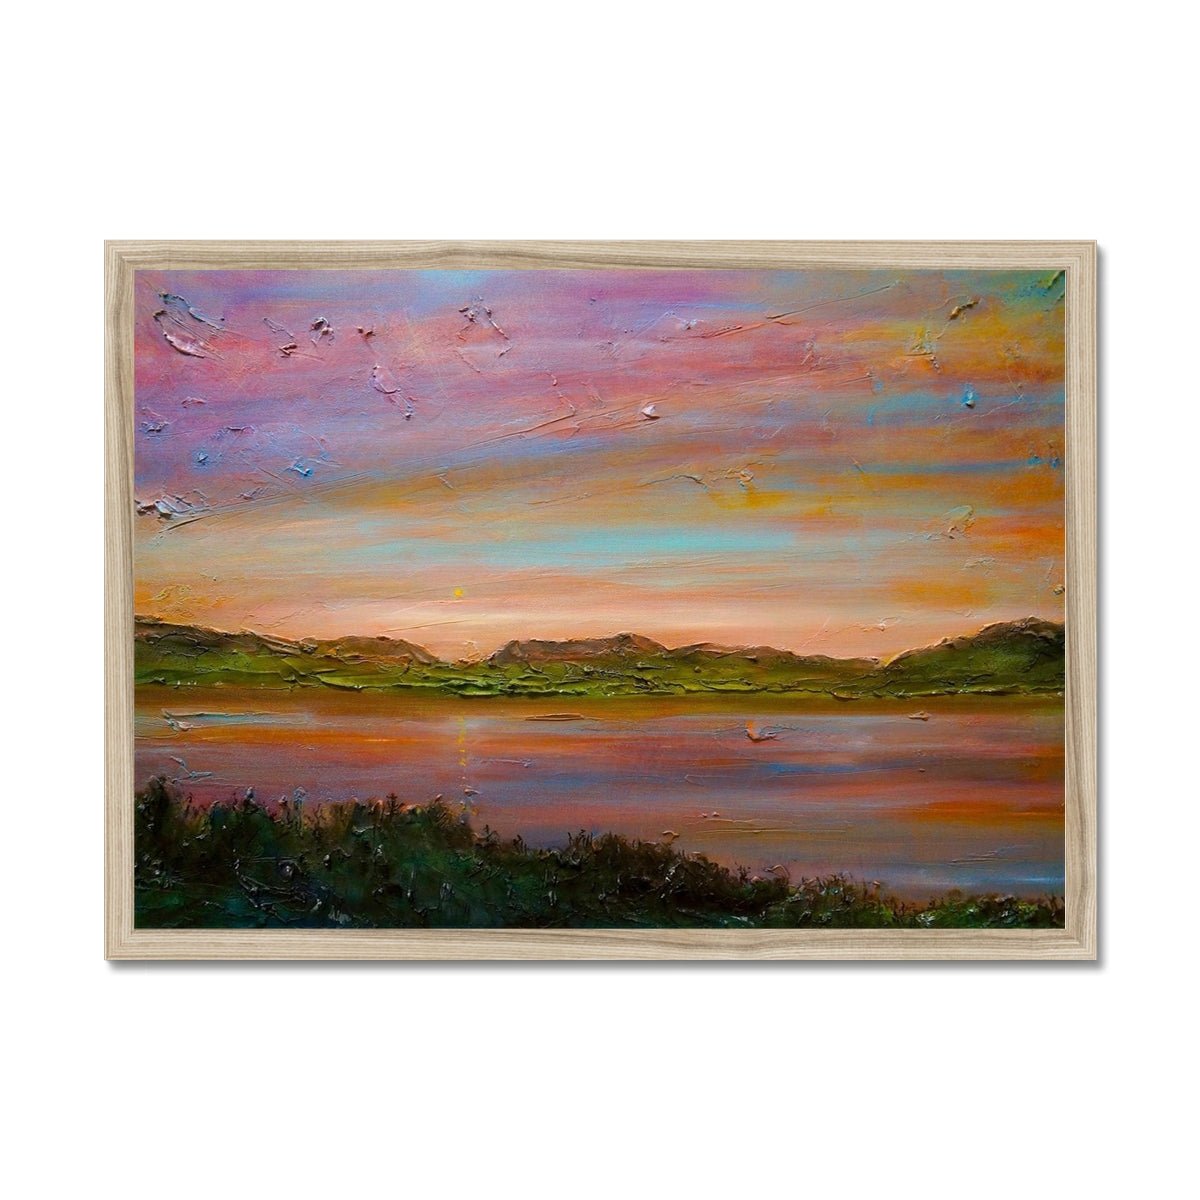 Gourock Golf Club Sunset Painting | Framed Prints From Scotland-Framed Prints-River Clyde Art Gallery-A2 Landscape-Natural Frame-Paintings, Prints, Homeware, Art Gifts From Scotland By Scottish Artist Kevin Hunter